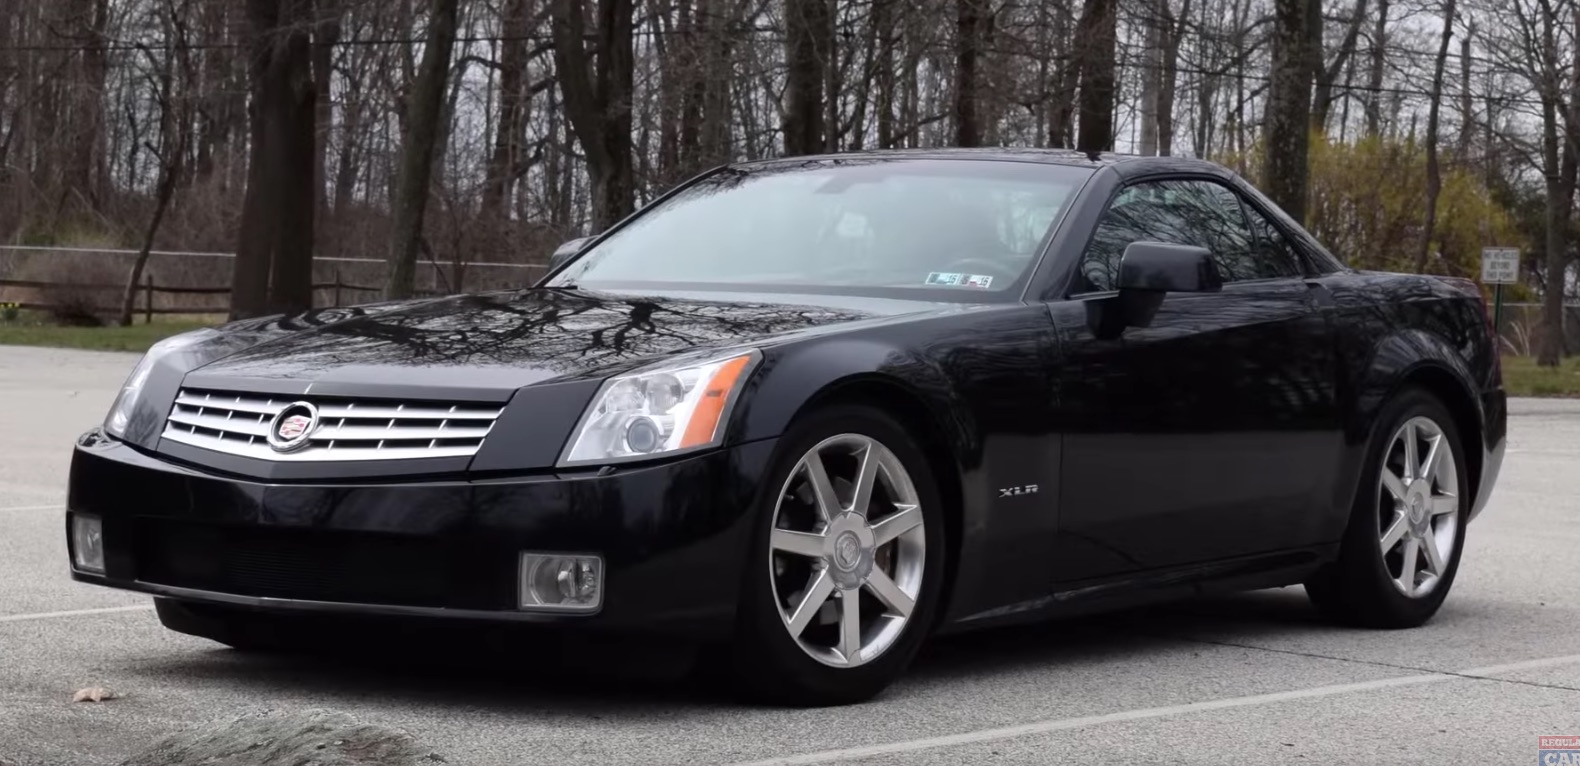 Cadillac XLR Tail Lamps Are Very Expensive; Here's Why | GM Authority